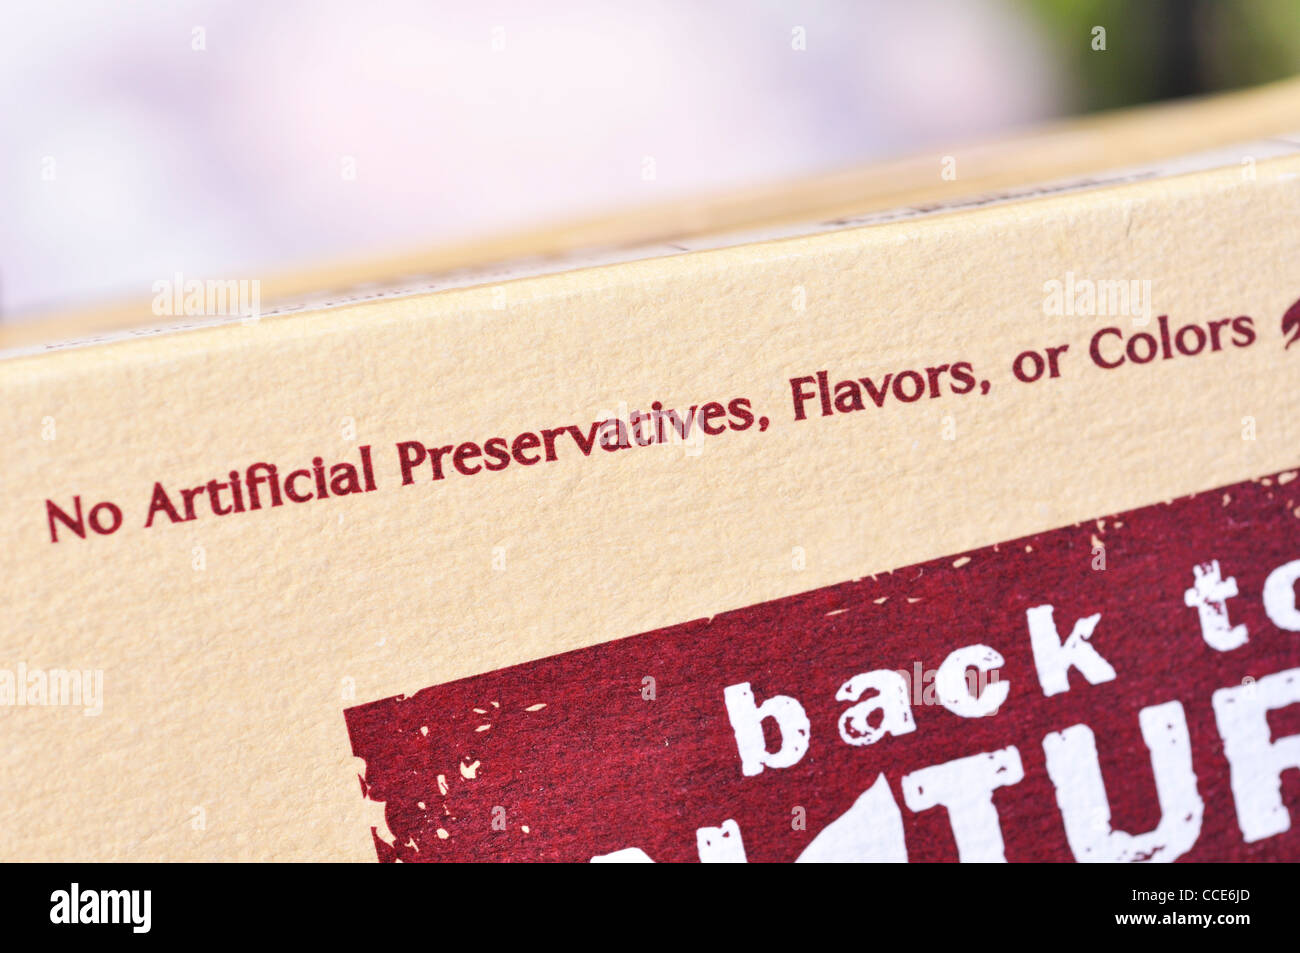 No artificial preservatives, flavors, or colors sign on food package Stock Photo